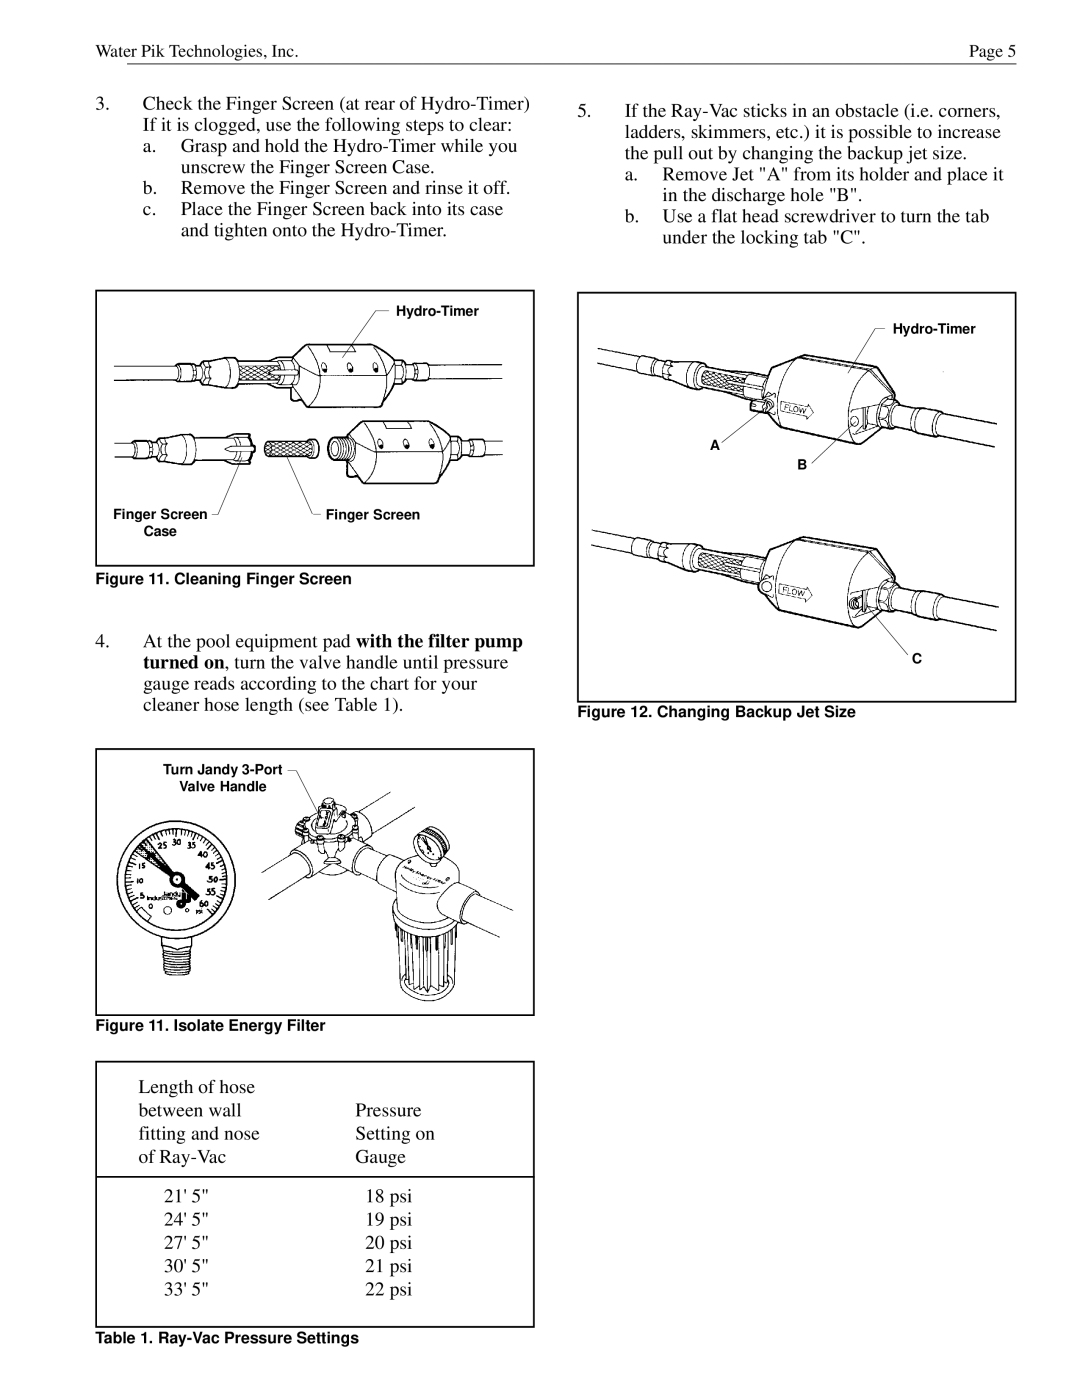 Waterpik Technologies H0555100 owner manual Check the Finger Screen at rear of Hydro-Timer 